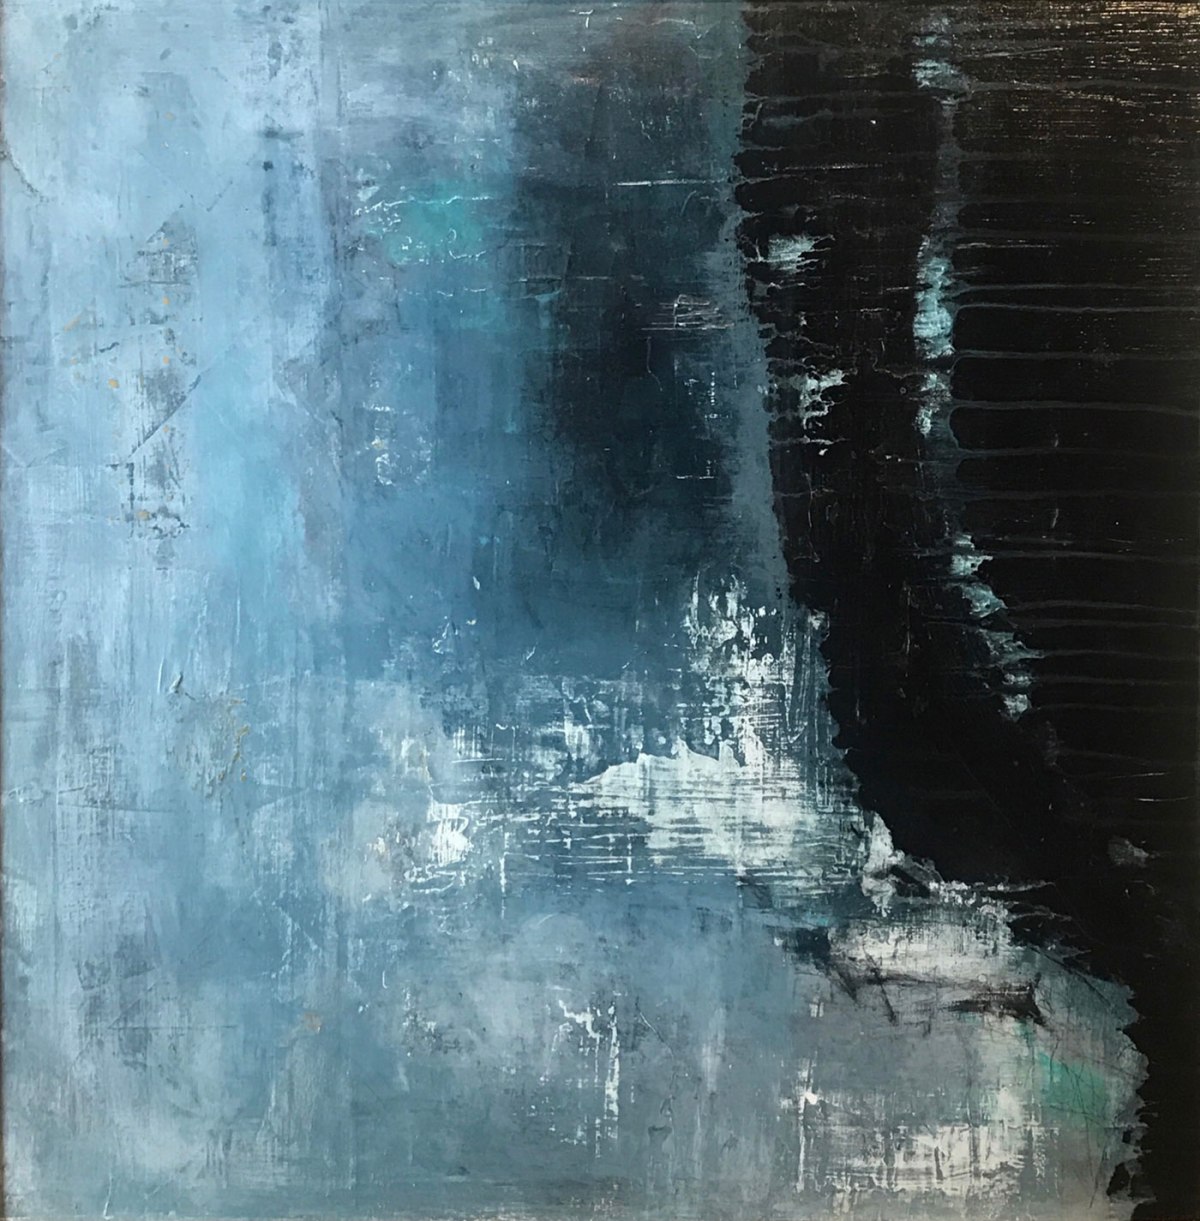 Visibility, a painting by Sarah Platenius